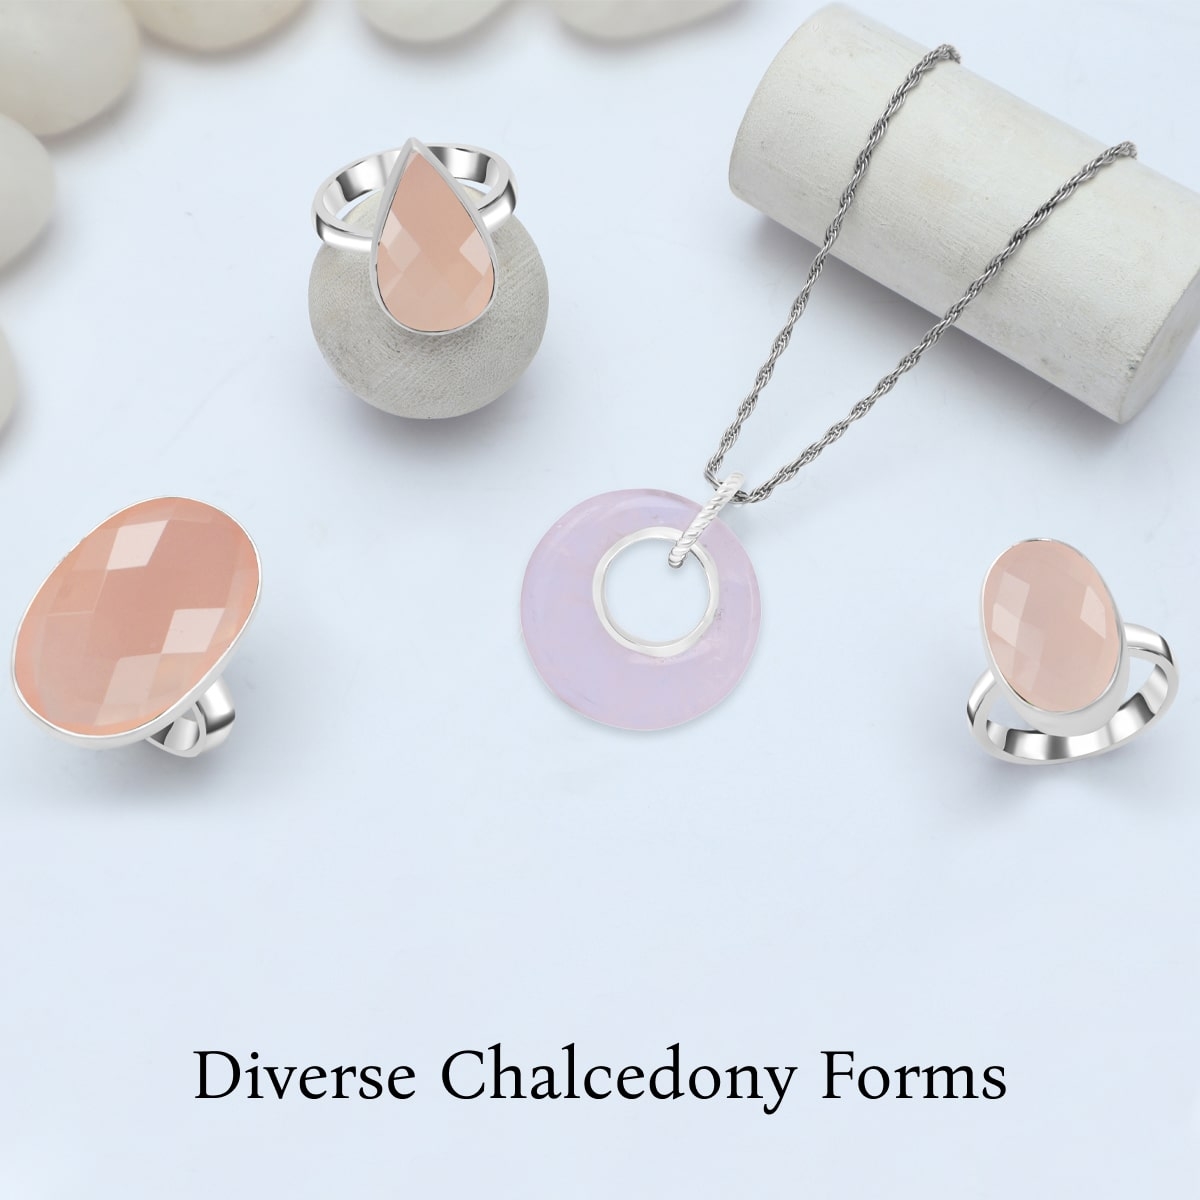 Different Types of Chalcedony